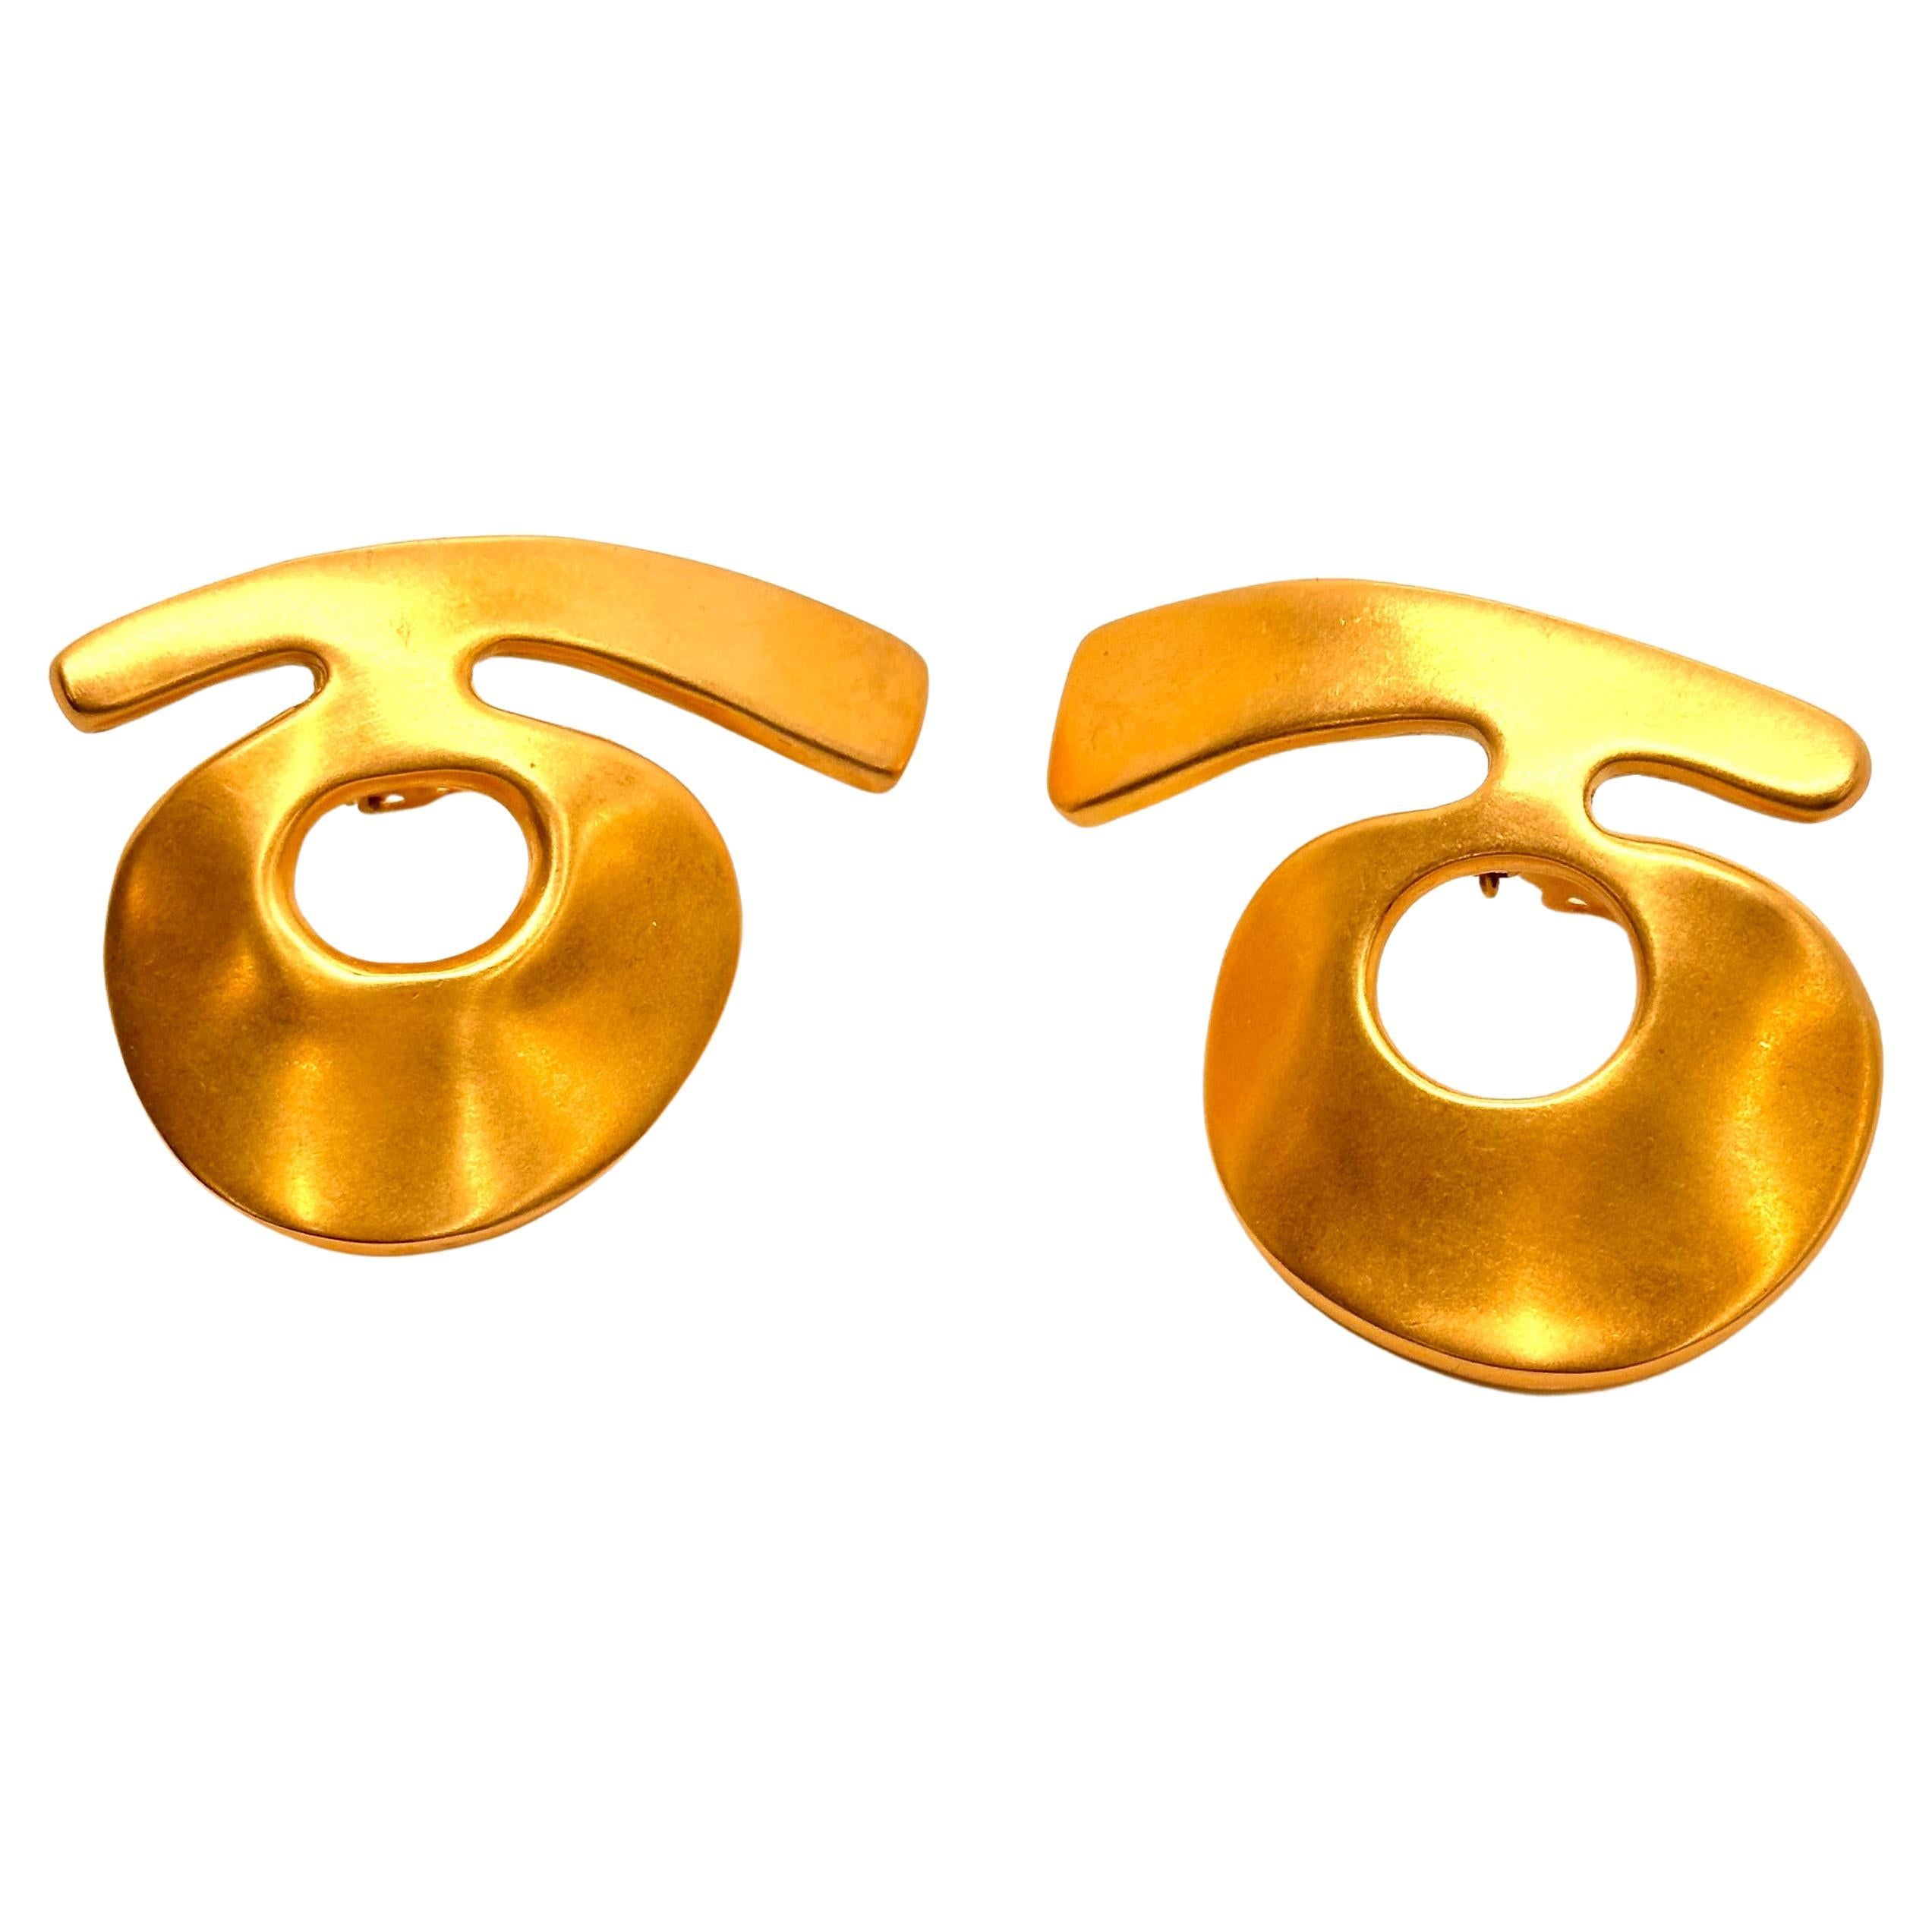 These very unusual Bold /Gold earrings are actually buttons in that they are clips and sit high on the ear. The dynamic design features a curving cross bar over an attached donut form, like some alien calligraphy. Modern and daring, these earrings